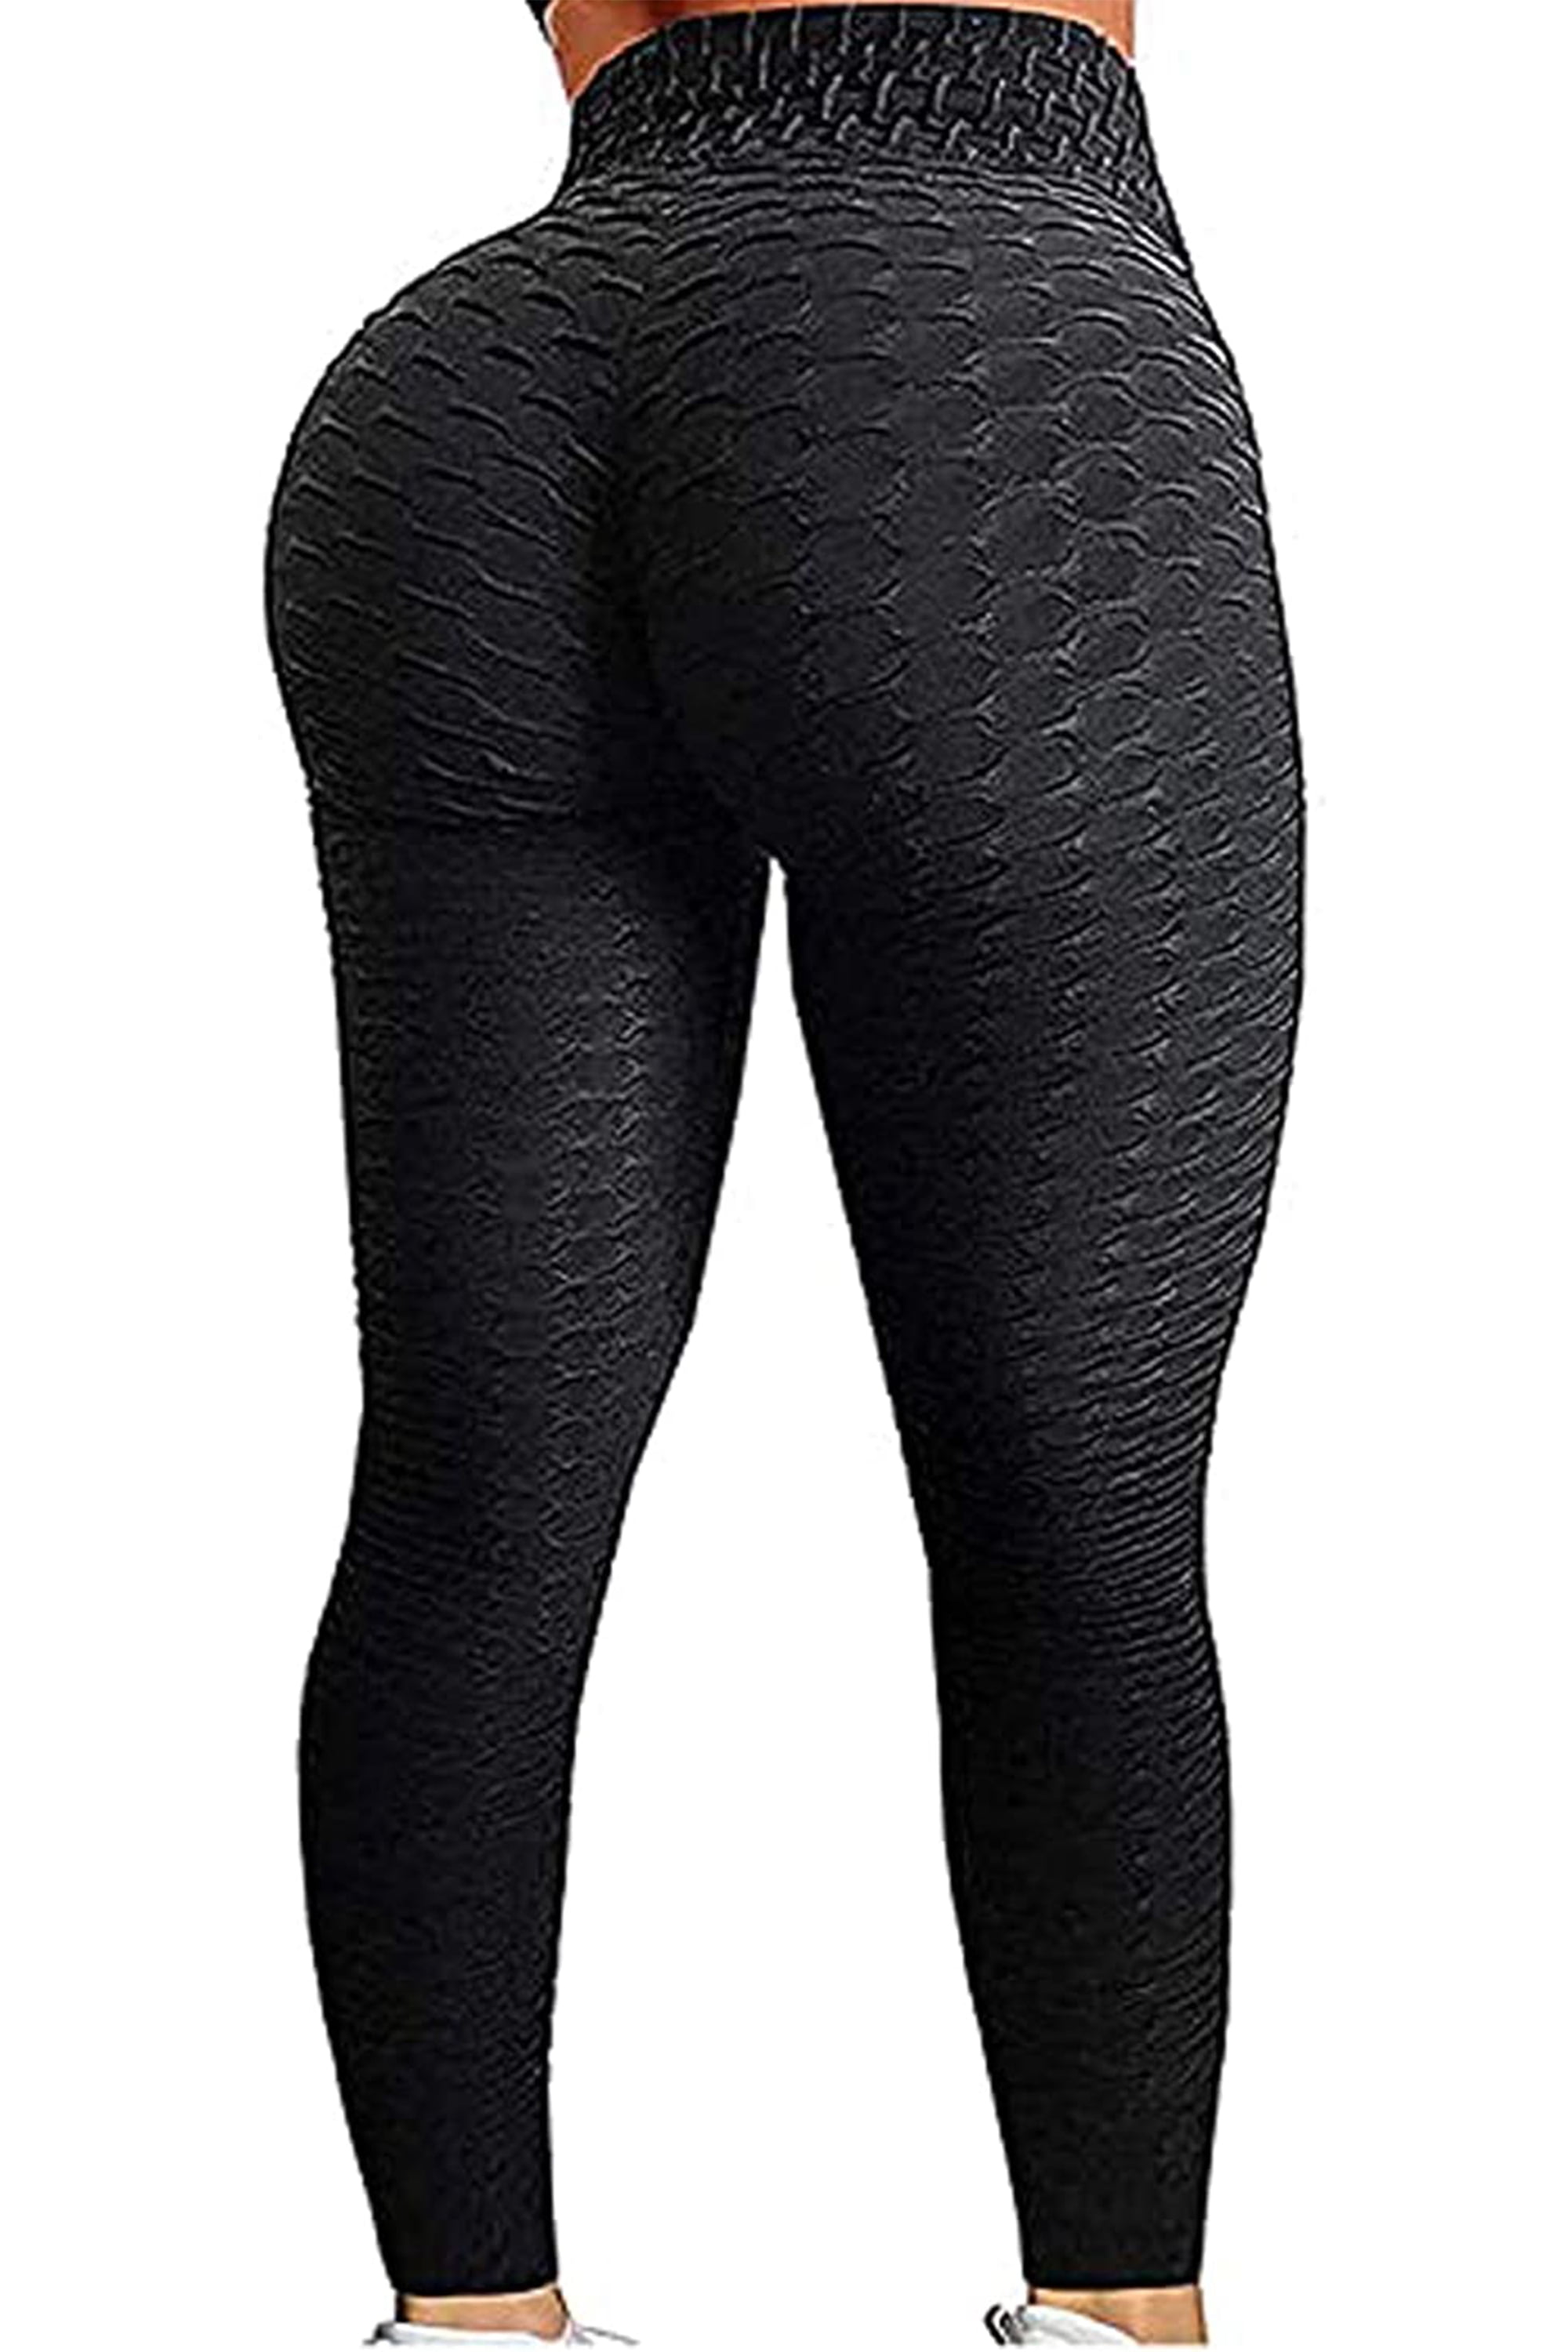 Fittoo Women Booty Yoga Pants High Waisted Ruched Butt Lift Textured Tummy Control Leggings